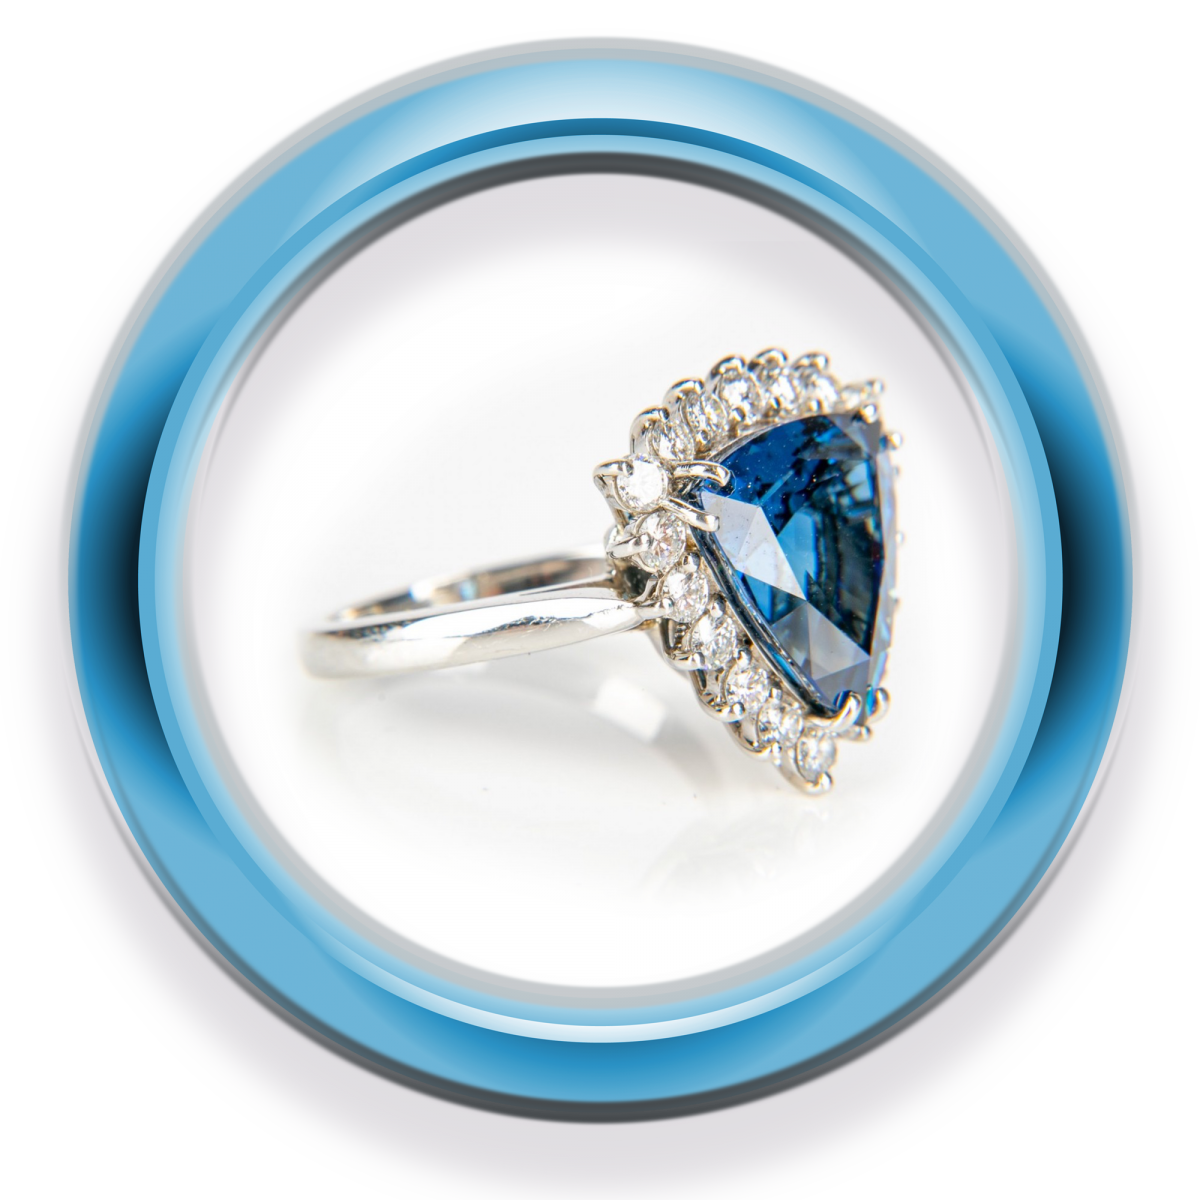 GIA CERTIFIED NATURAL SAPPHIRE & DIAMOND RING, 8.32 CTS 18290 - GIA CERTIFIED NATURAL SAPPHIRE & DIAMOND RING, 8.32 CTS, $70,000 REPLACEMENT VALUE